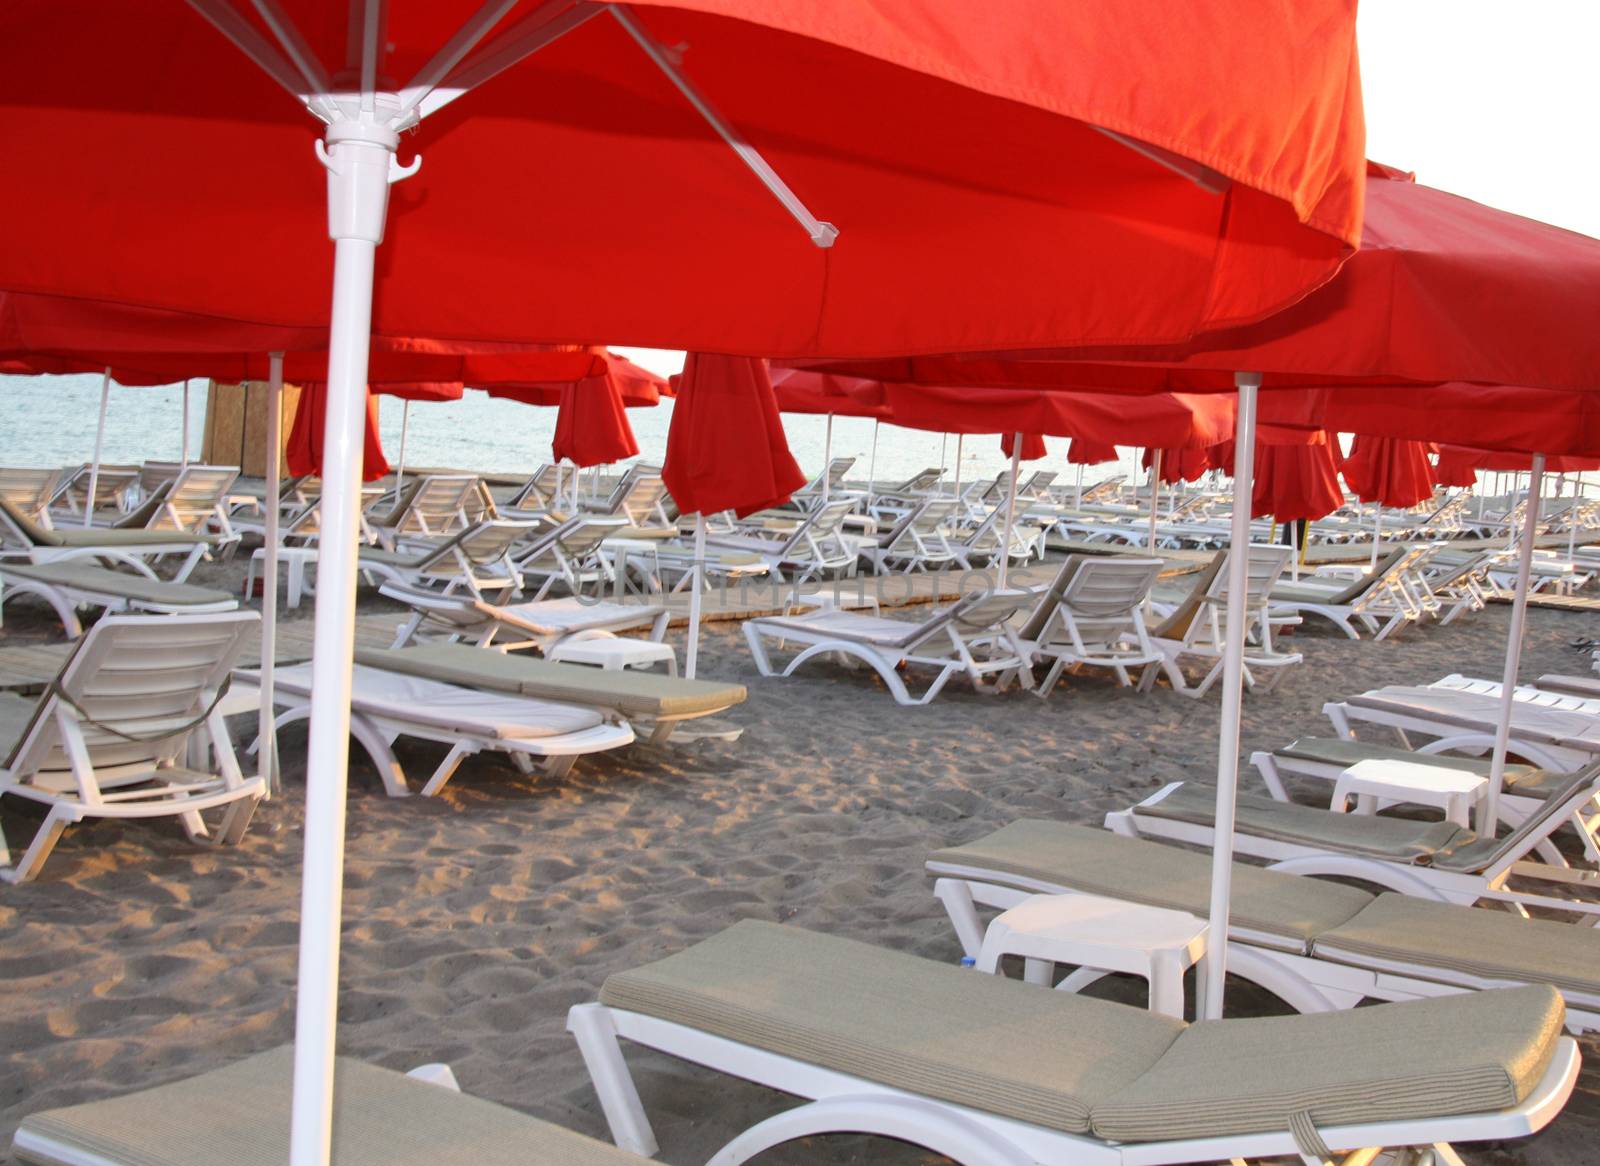 Plenty of sun loungers in a row on the coast. Folding chairs on the beach. Sandy beach, sunbeds with mattresses.  by alexx60